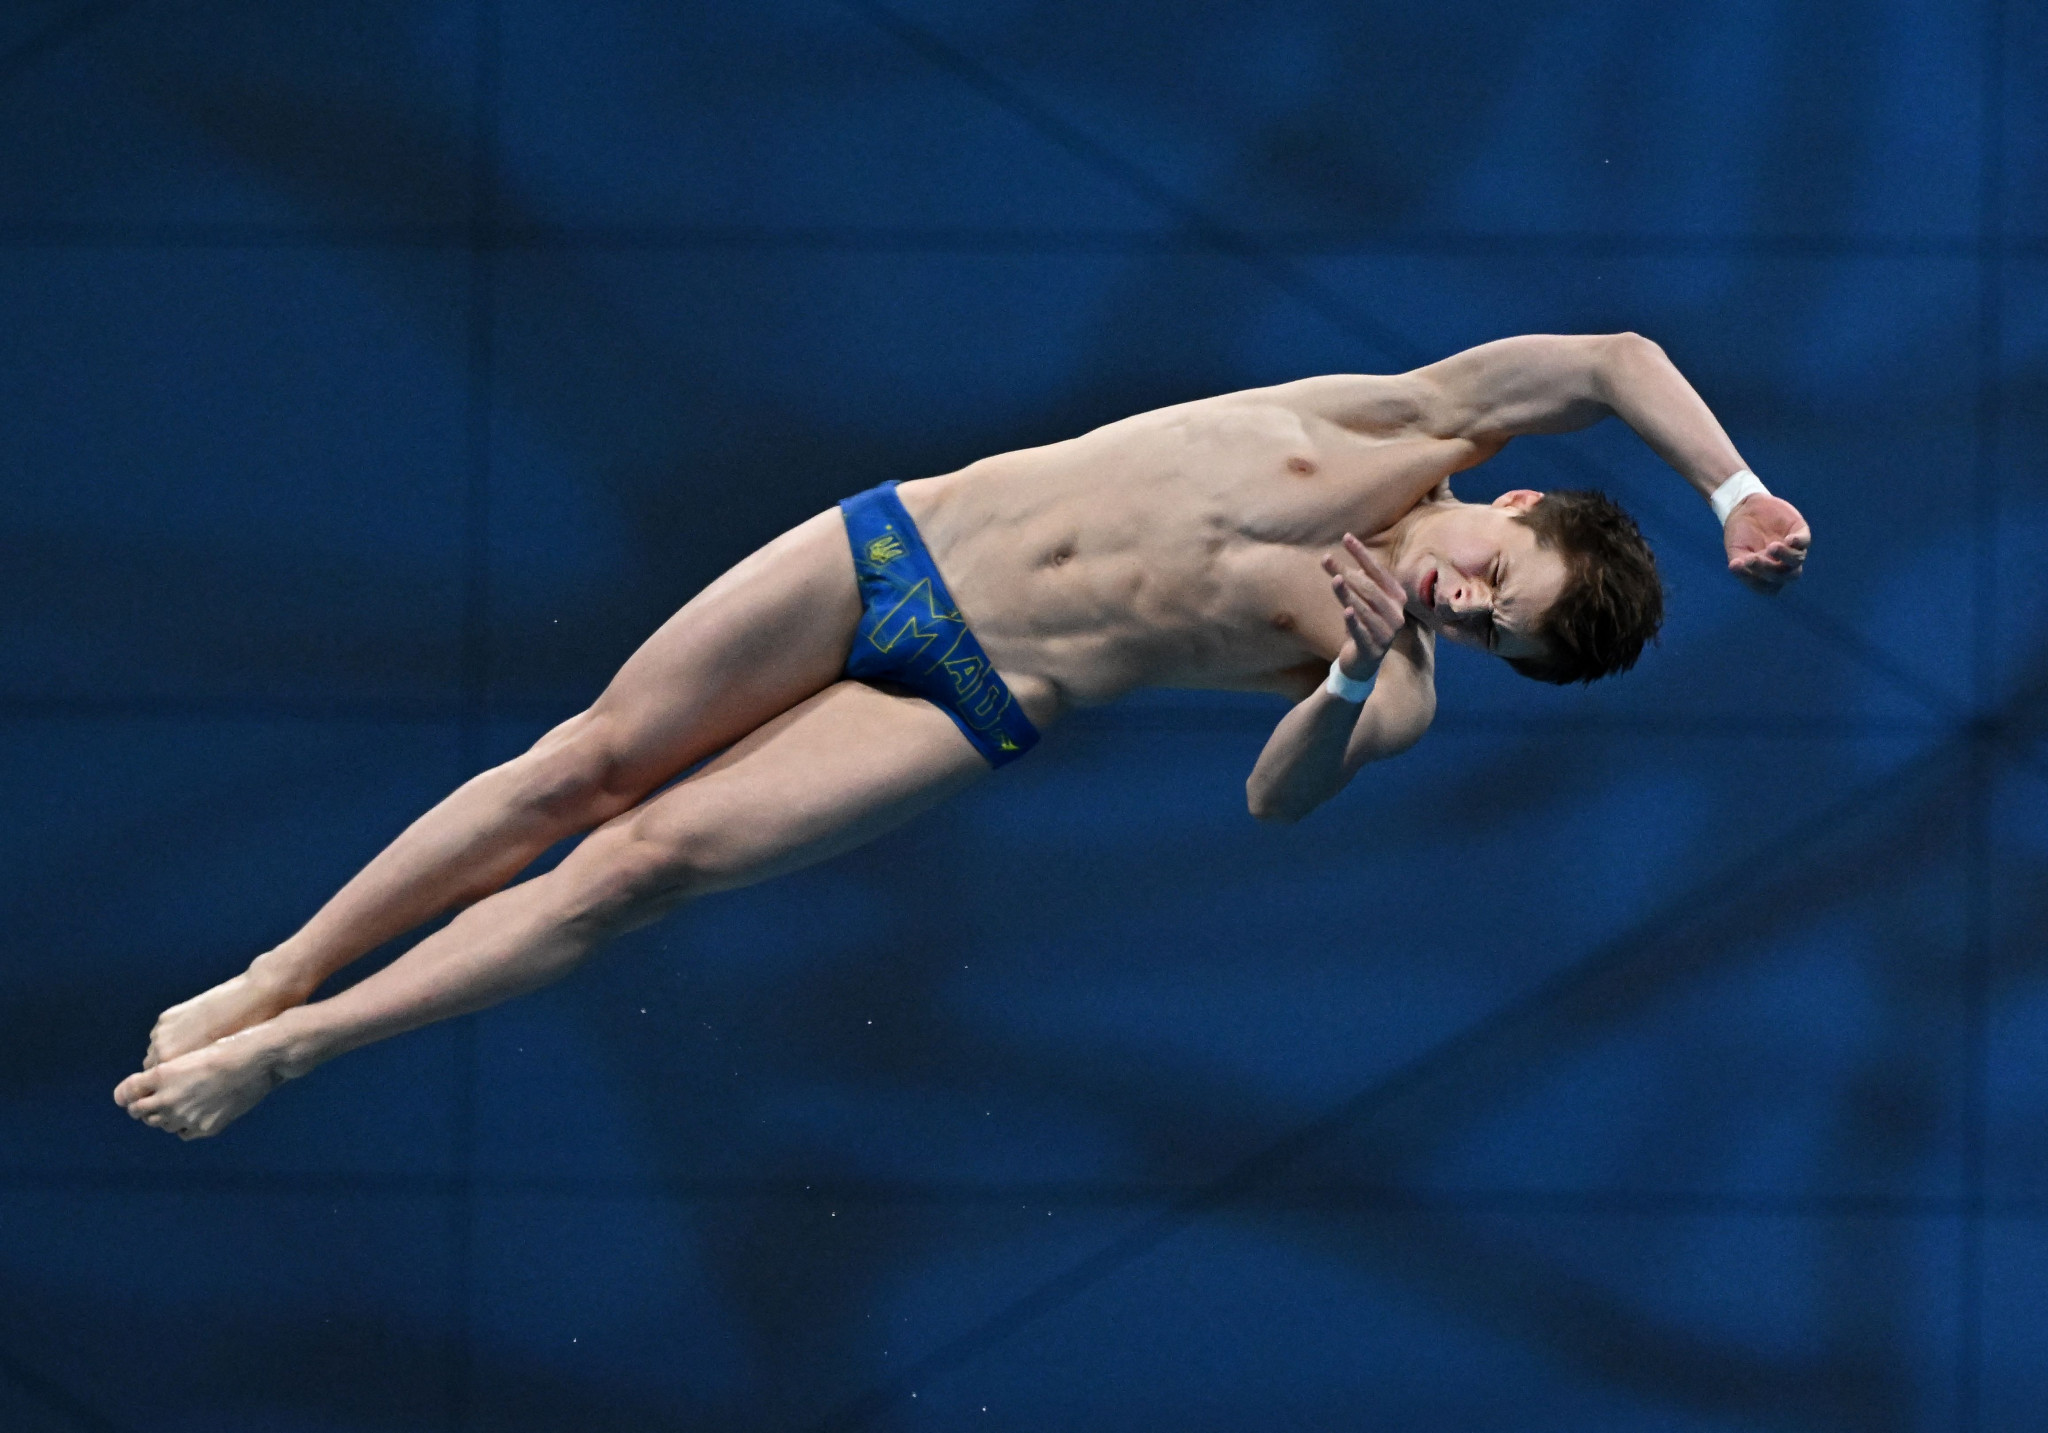 Ukraine's 10m platform European champion Oleksiy Sereda is among divers from the country urging a ban on Russian and Belarusian athletes ©Getty Images